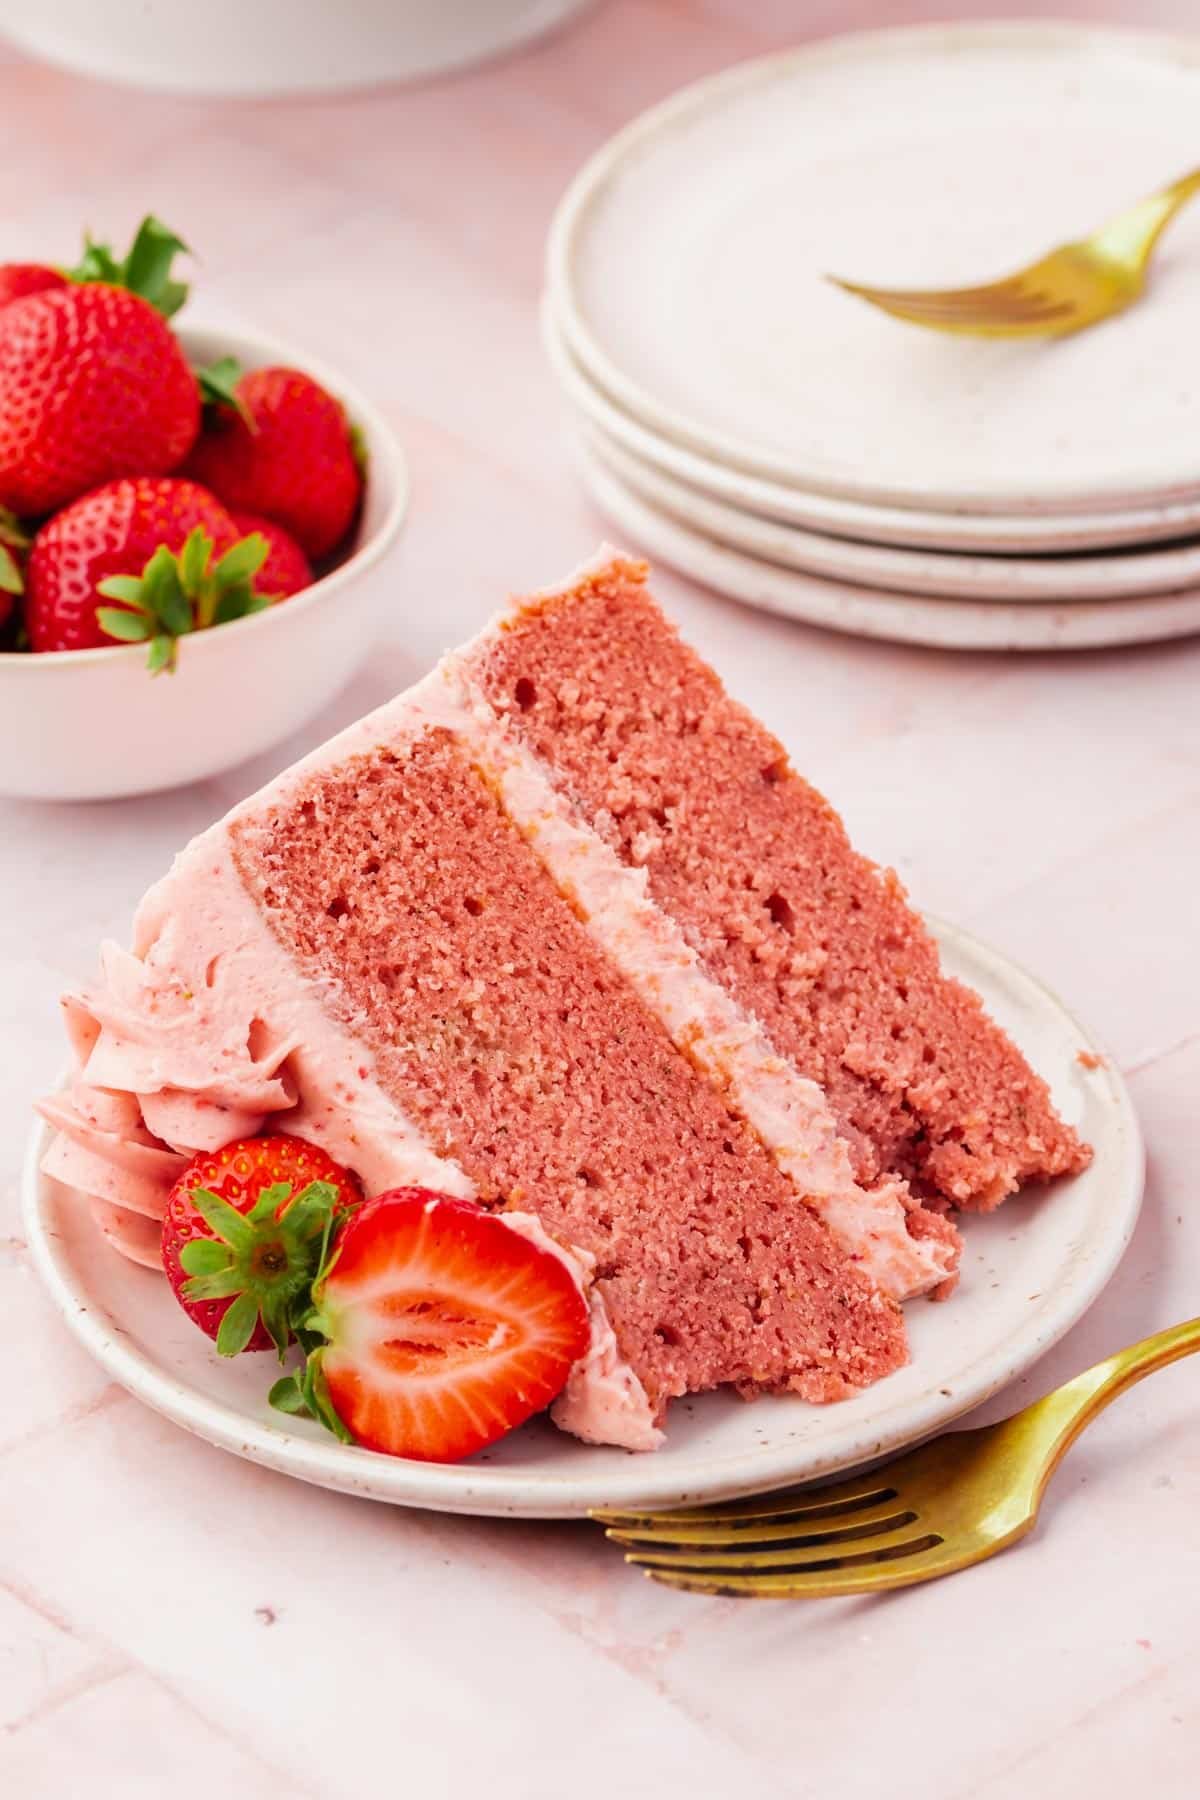 A slice of gluten-free strawberry cake on a plate with fresh strawberries next to a gold fork.